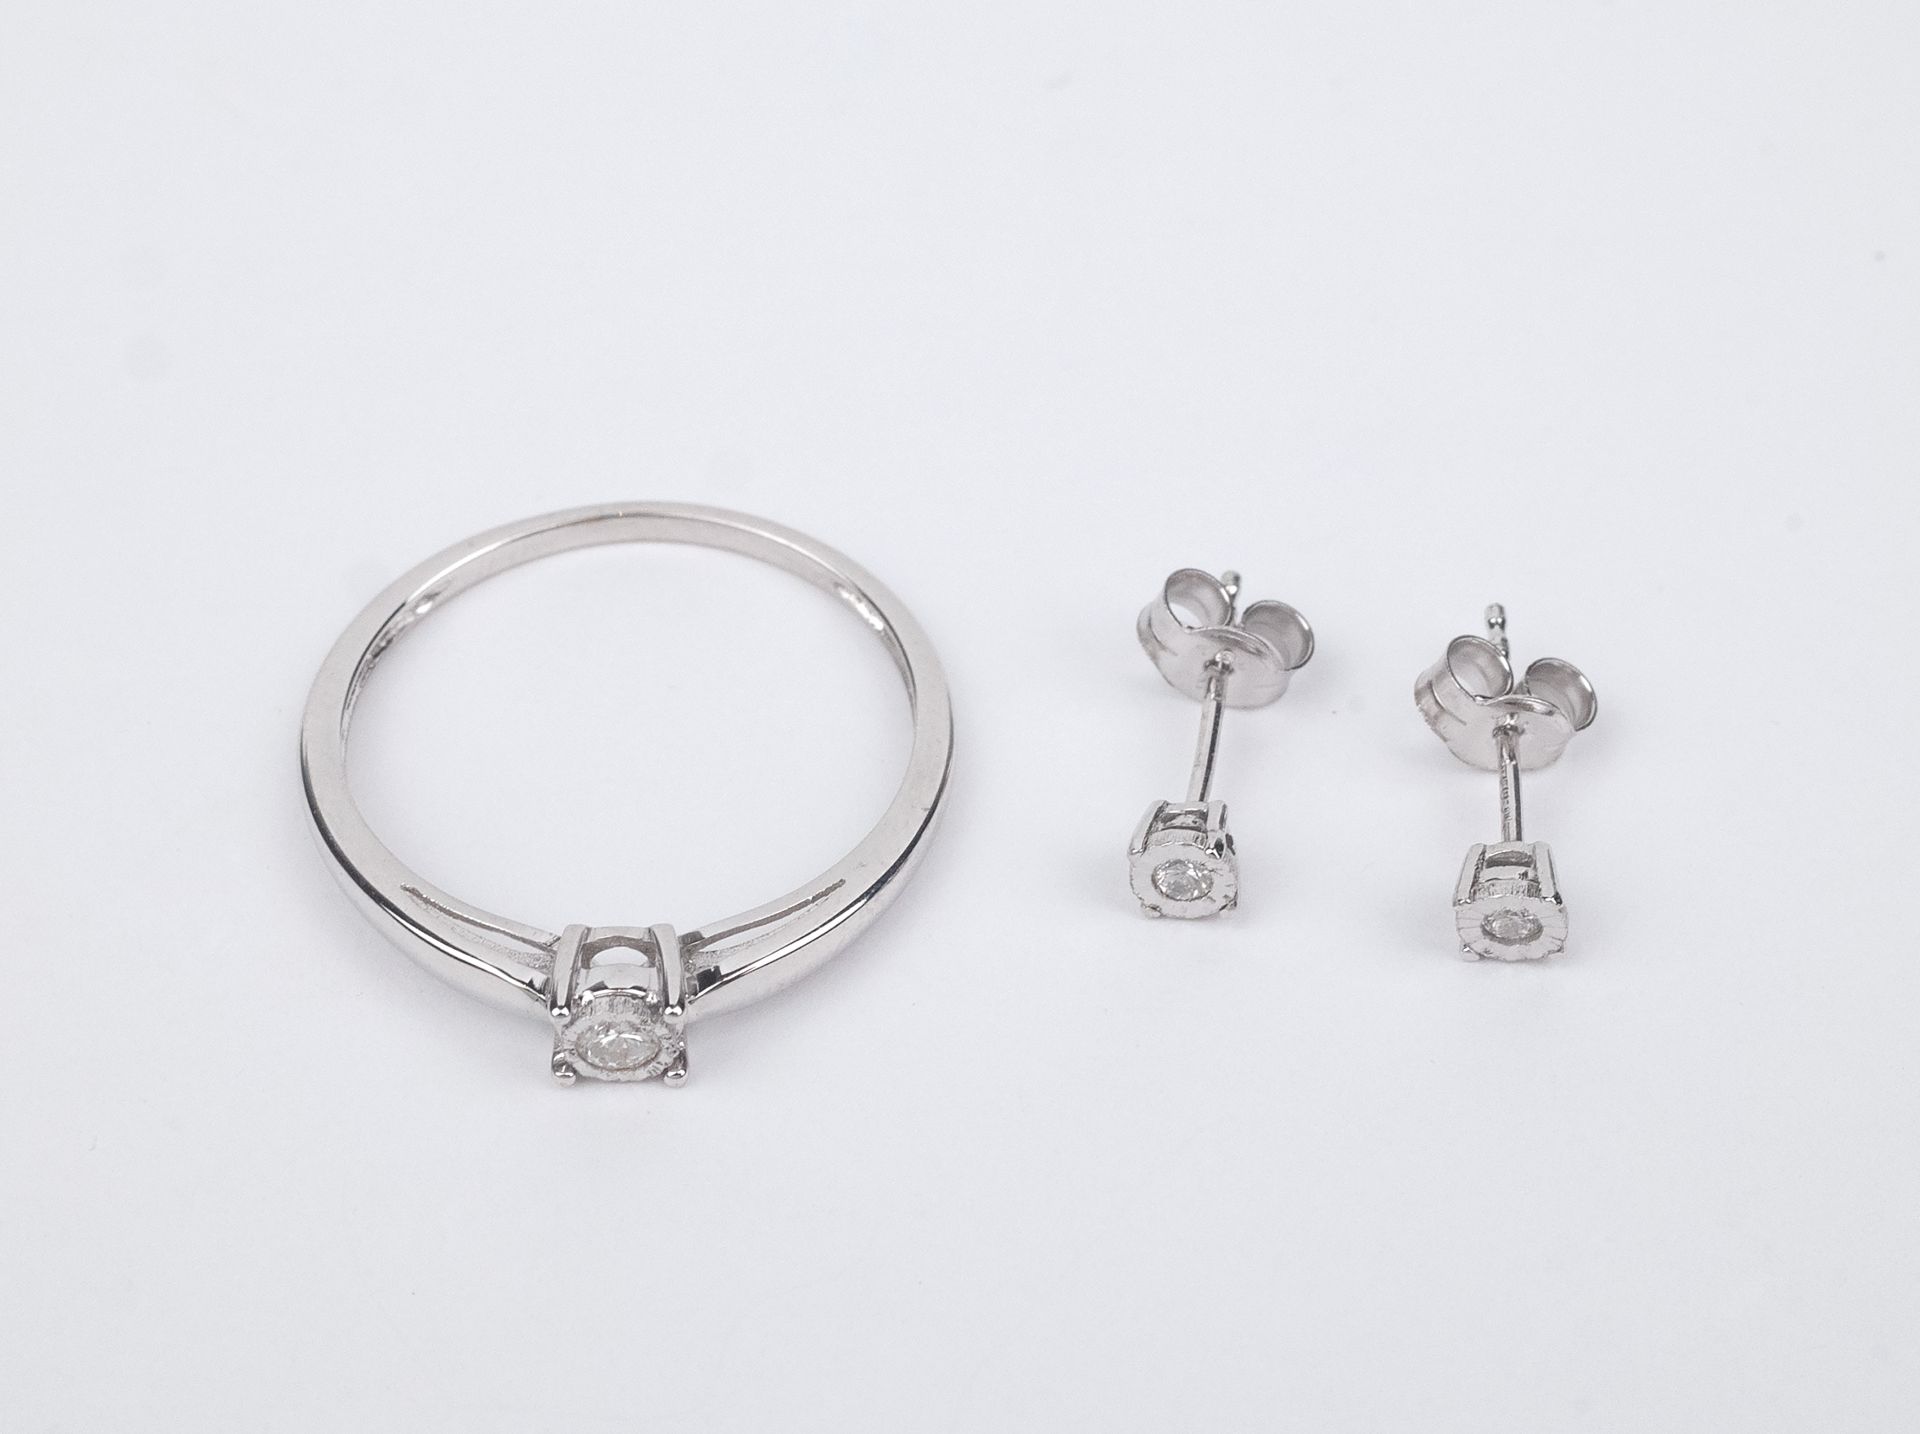 A set of diamond earrings and a solitaire ring